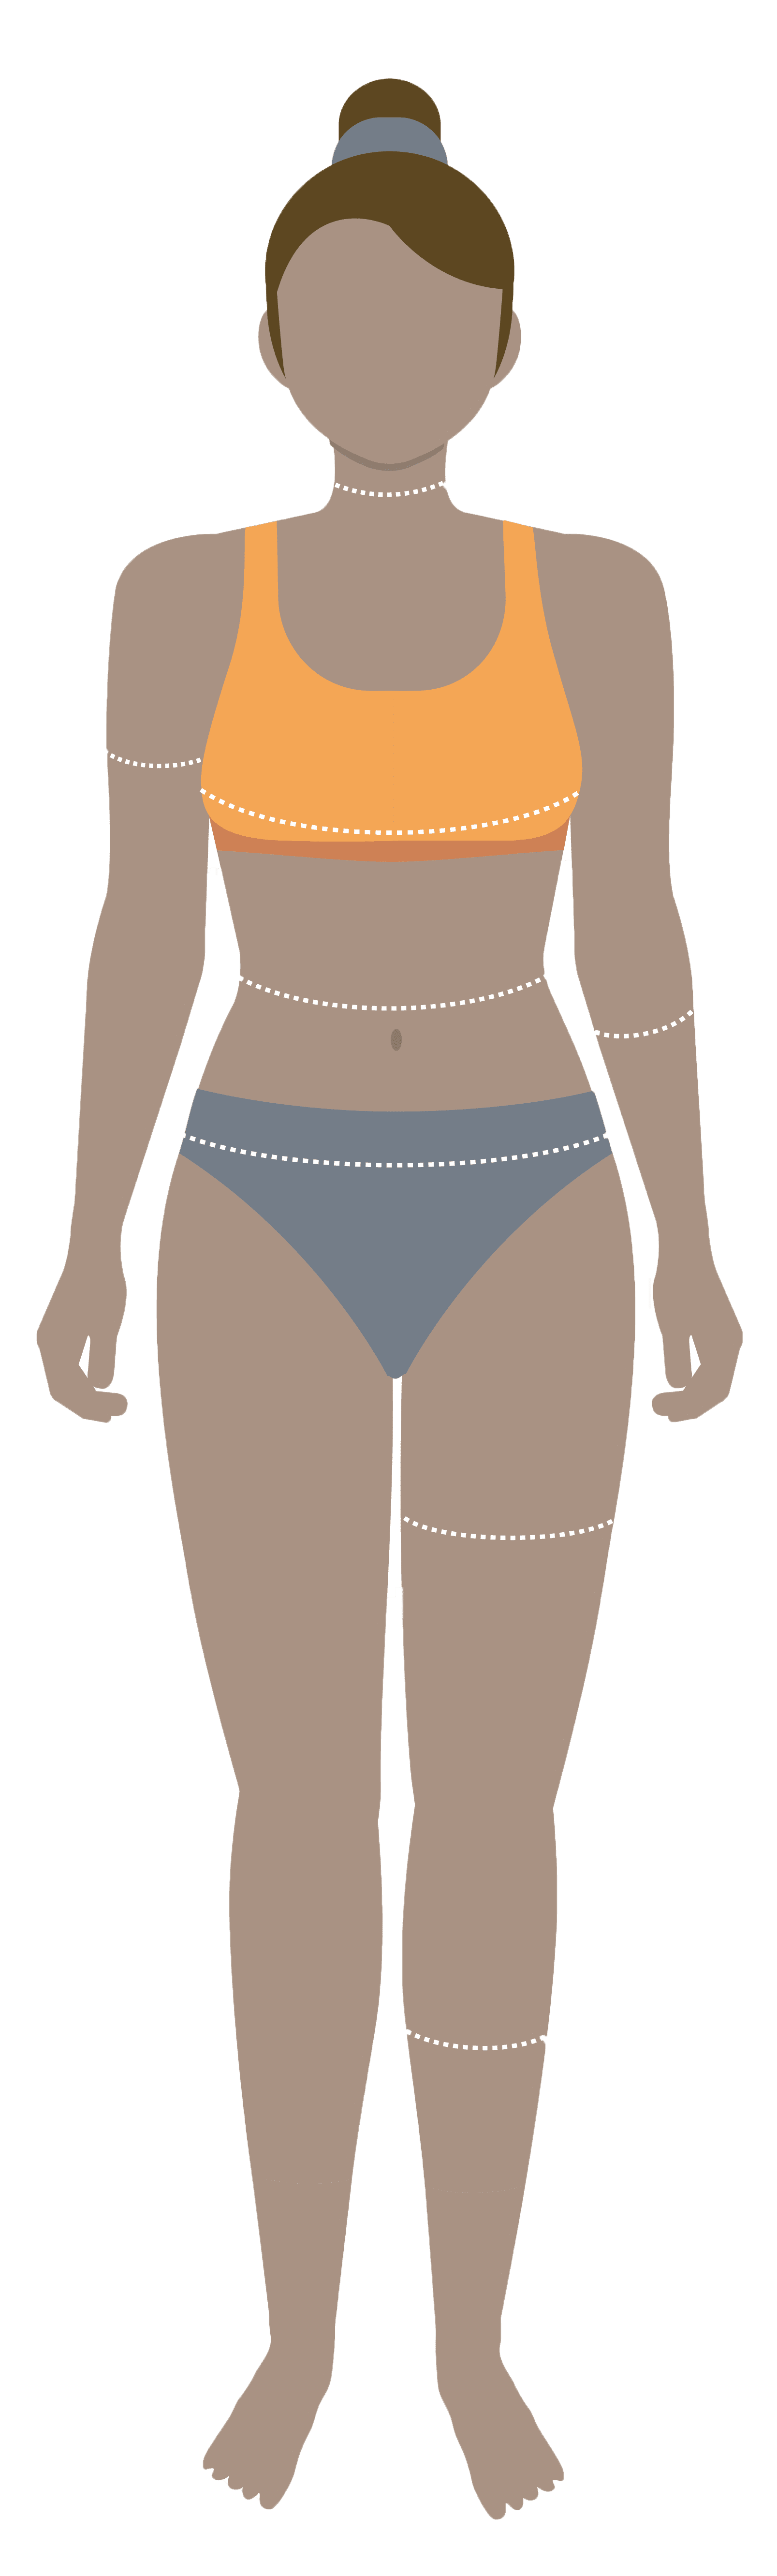 drawing of a woman wearing athletic bra and bathing suit bottoms for body scan